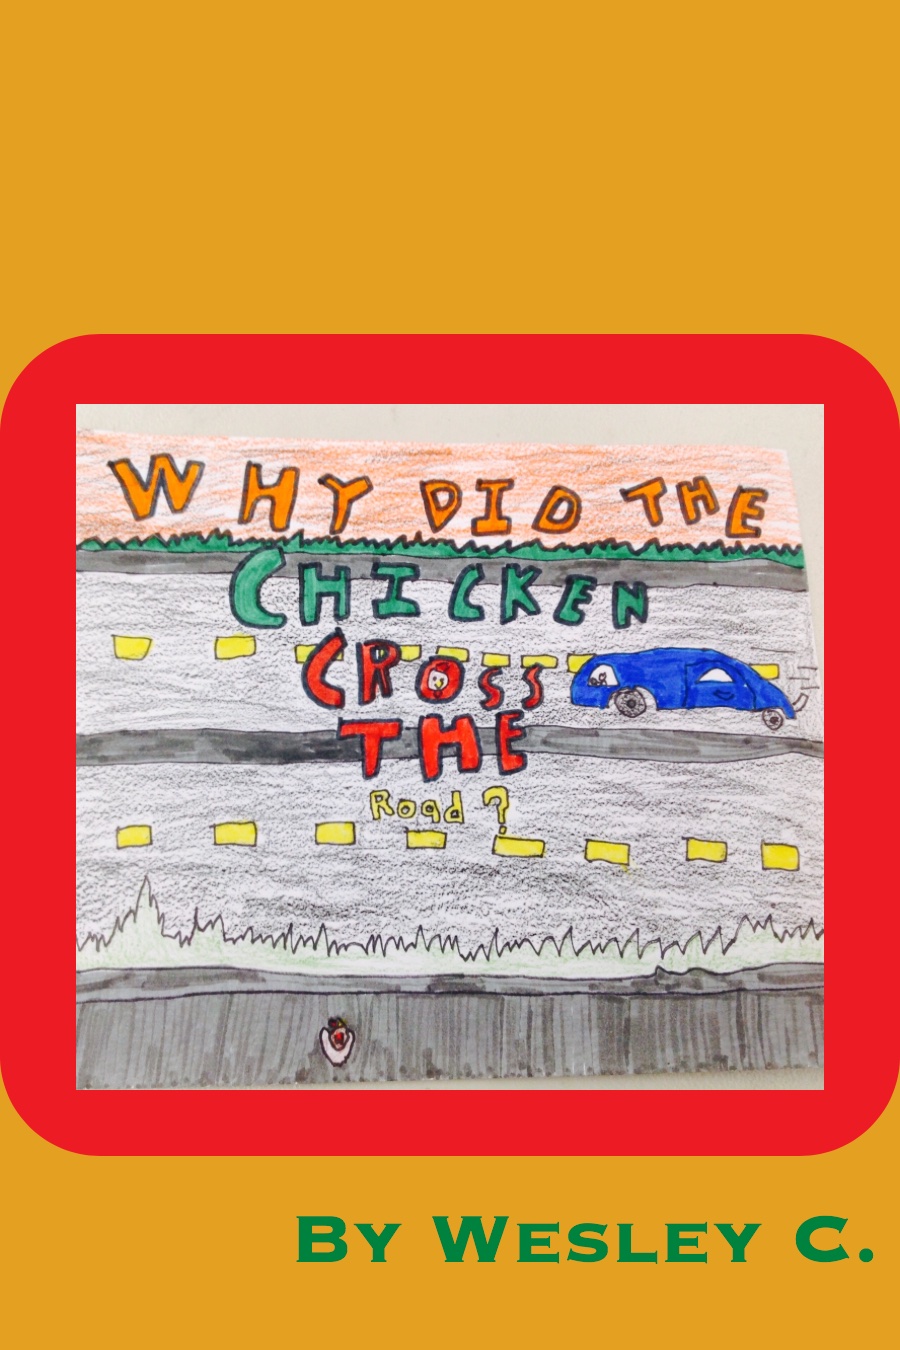 Why did the Chicken Cross the Road by Wesley C